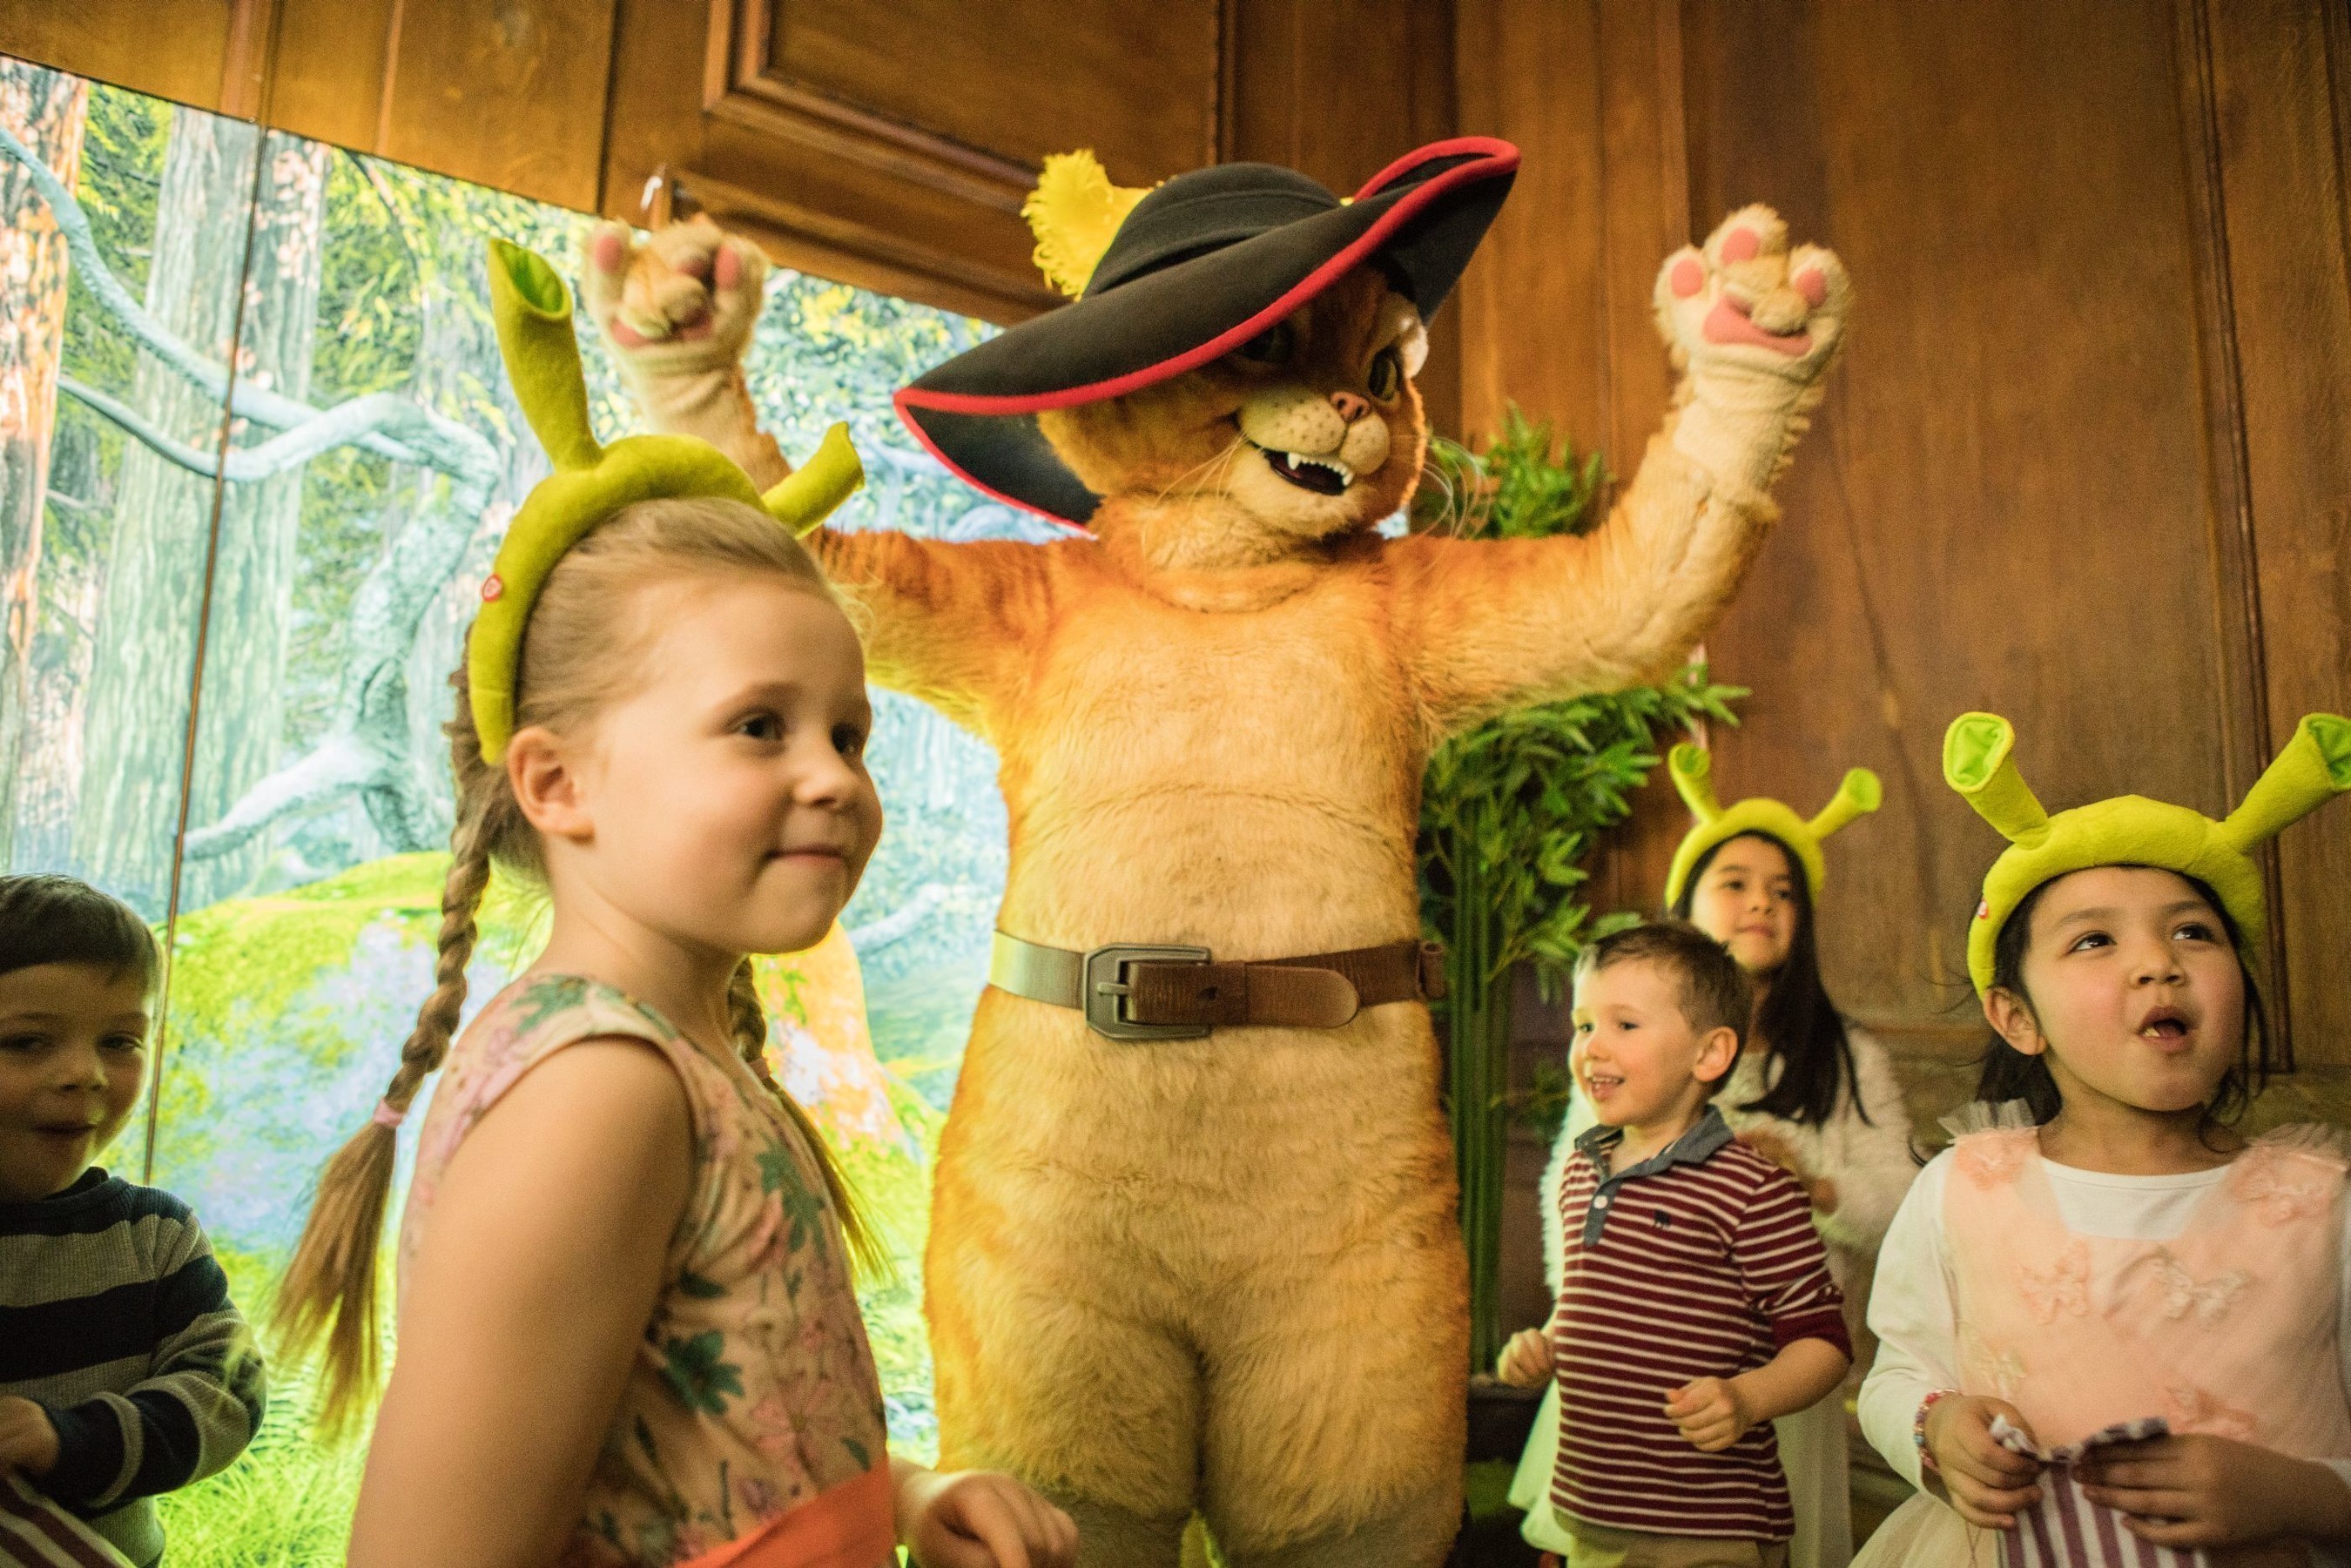 Puss in Boots - Fairy tales brought to life for the next generation through live actors in London's 'DreamWorks Tours Shrek's Adventure!' (PRNewsFoto/Dreamworks Tours)